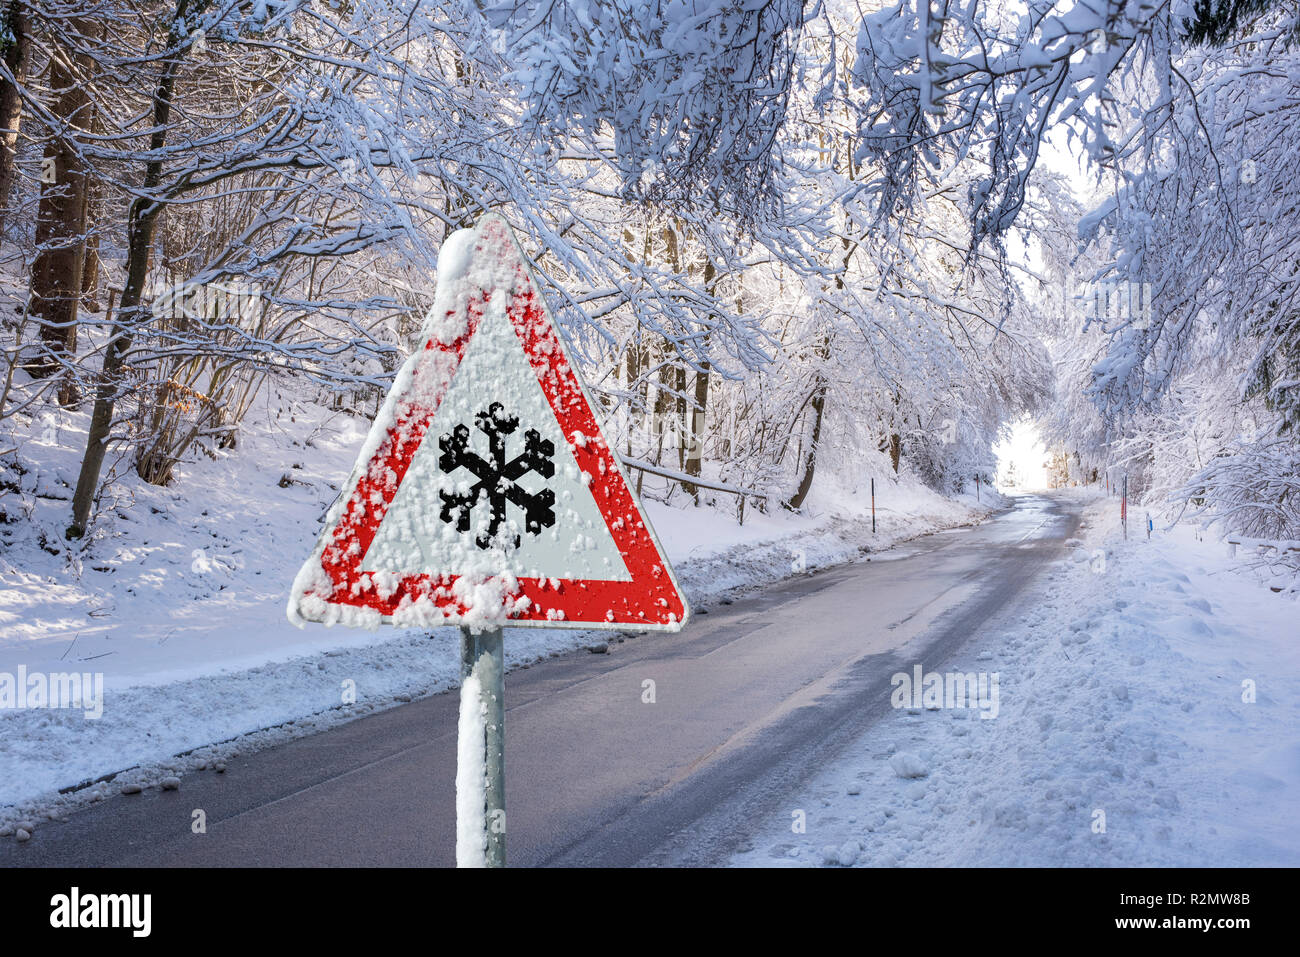 Warning sign in front of snow on rural road Stock Photo